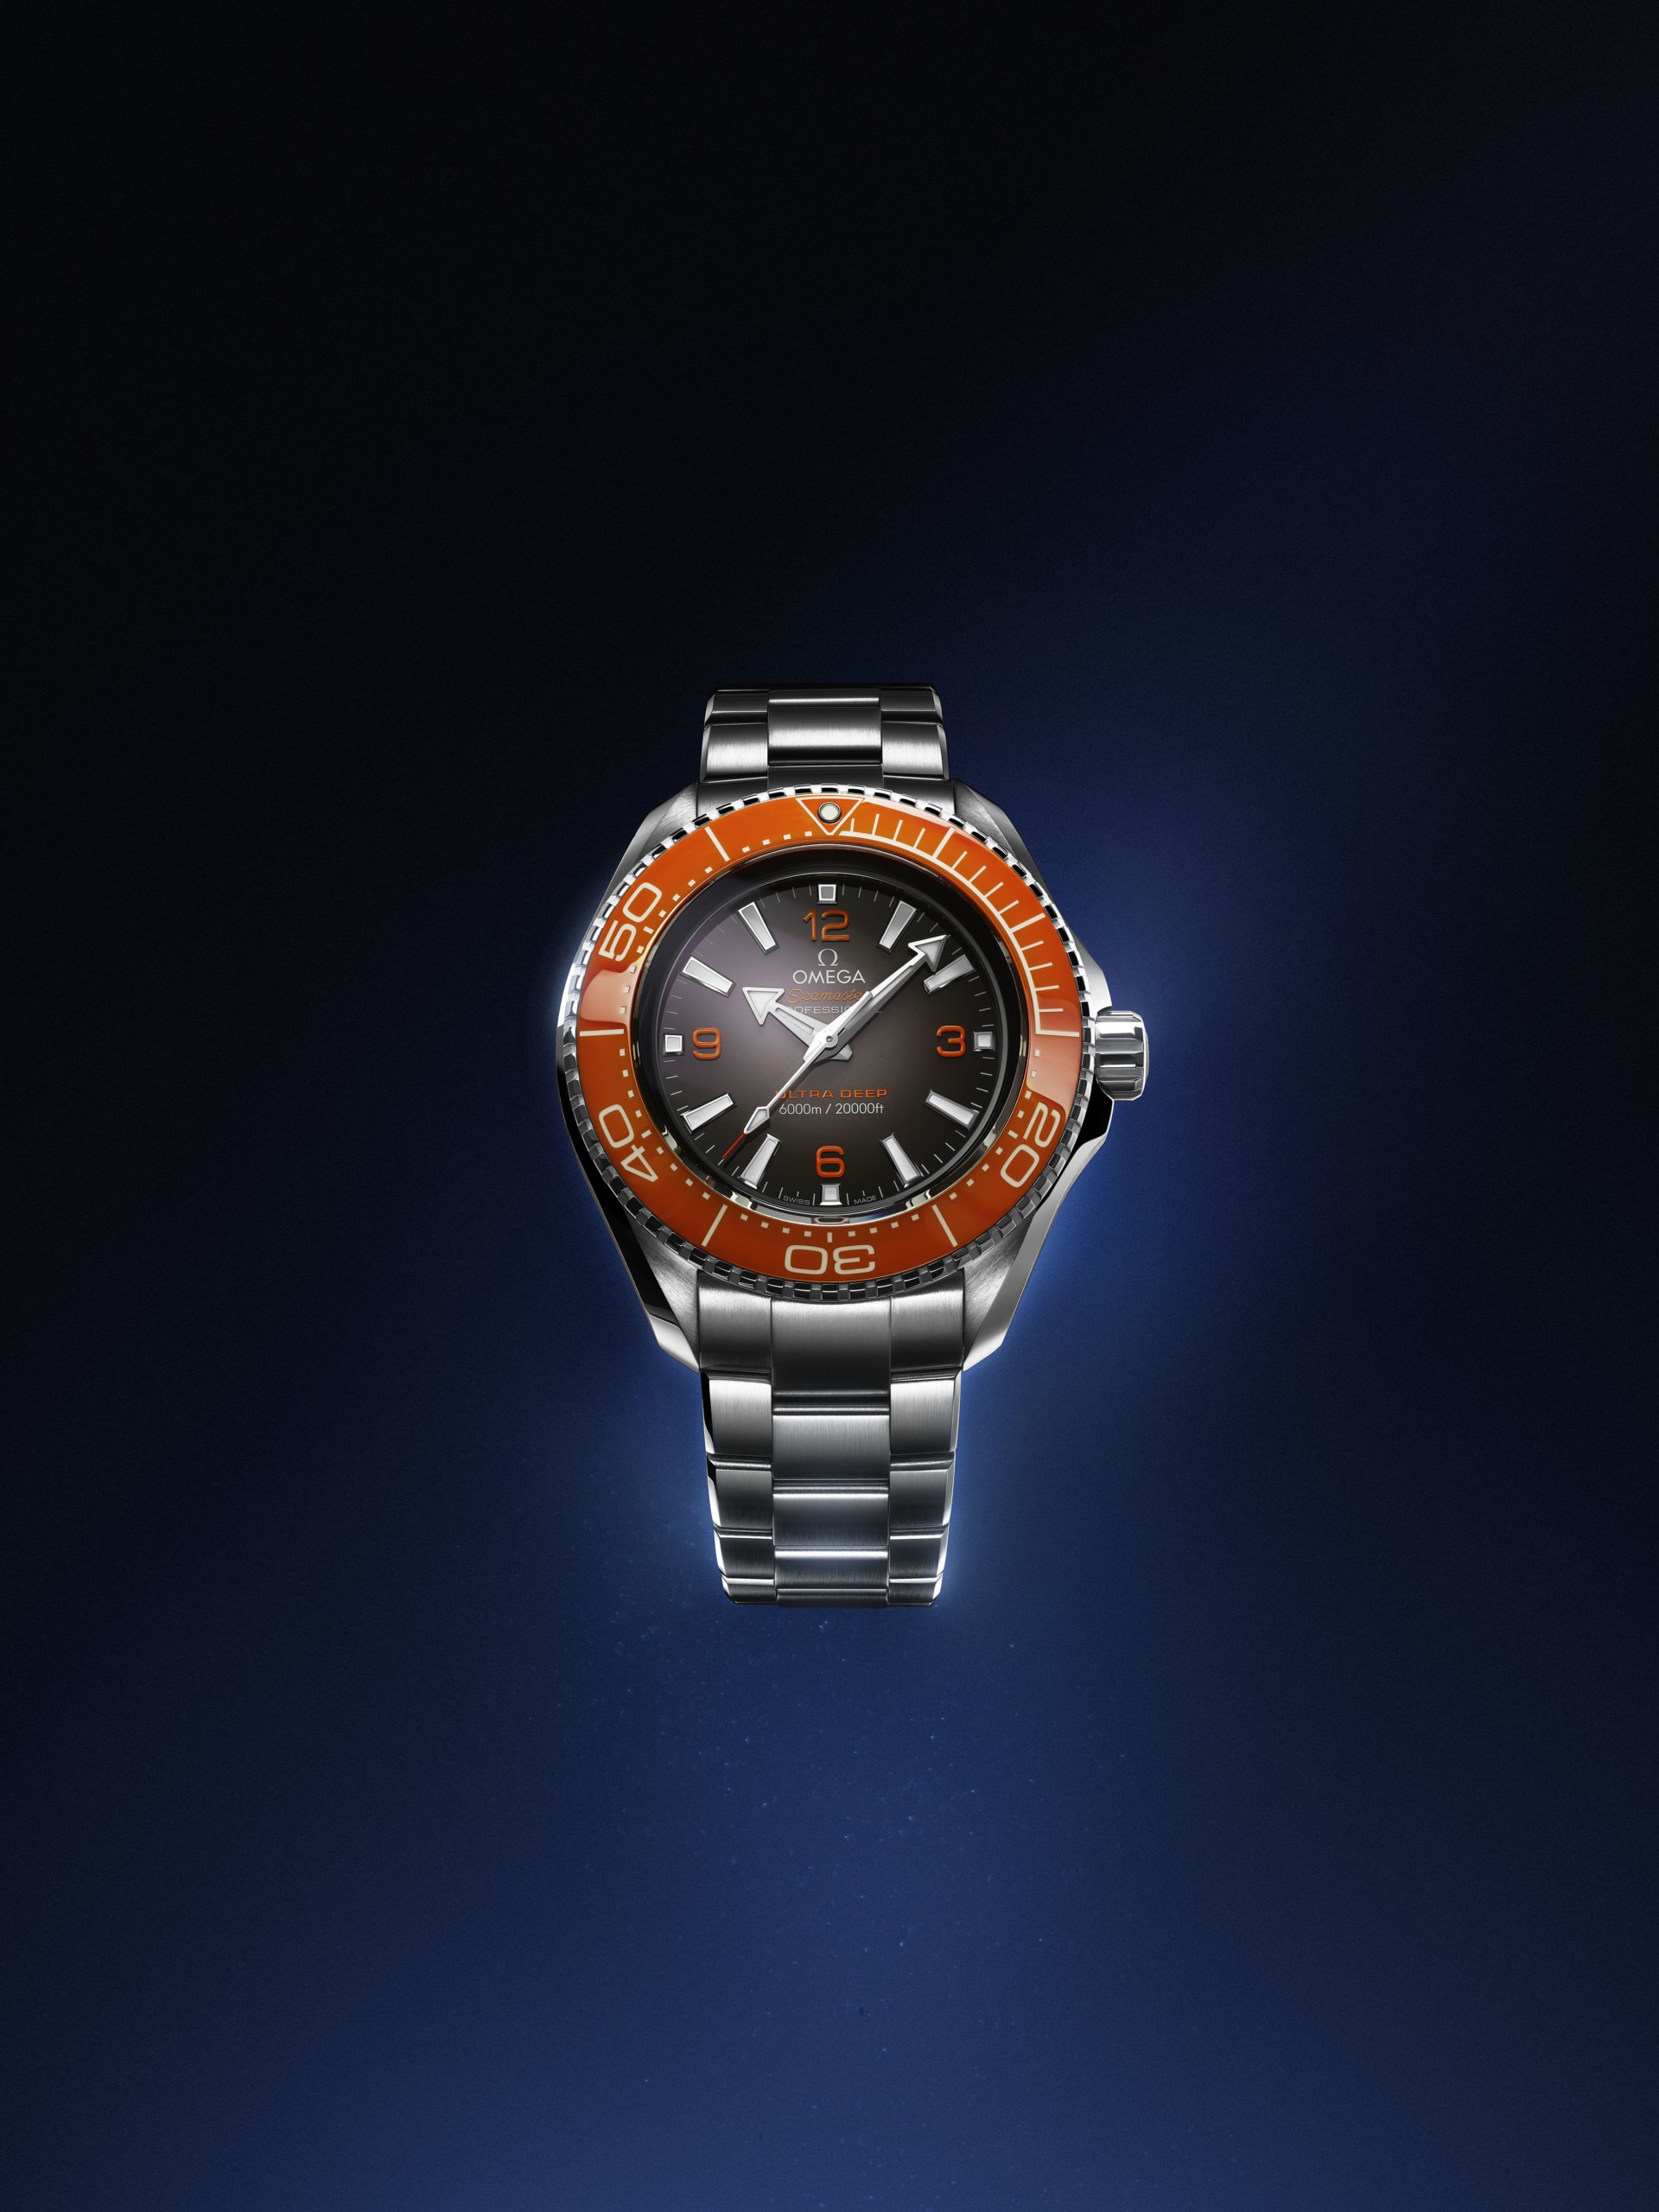 Omega's new Seamaster Planet Ocean Ultra Deep OMEGA_215.30.46.21.06.001-scaled